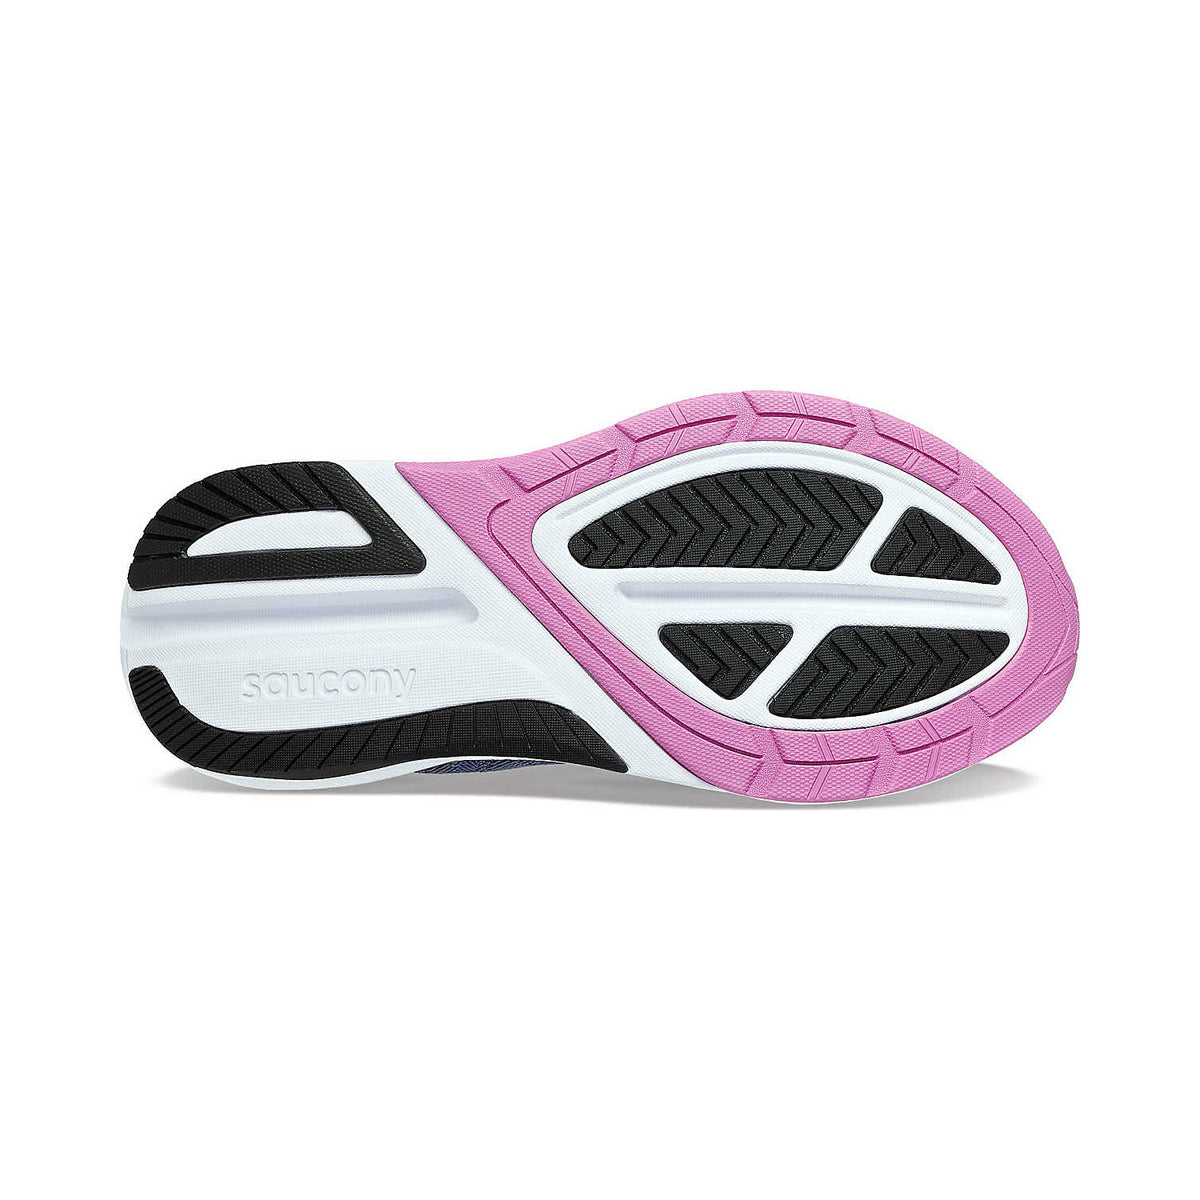 Bottom view of a SAUCONY ECHELON 9 INDIGO/GRAPE - WOMENS running shoe showing its white, black, and pink sole with Saucony logo visible.